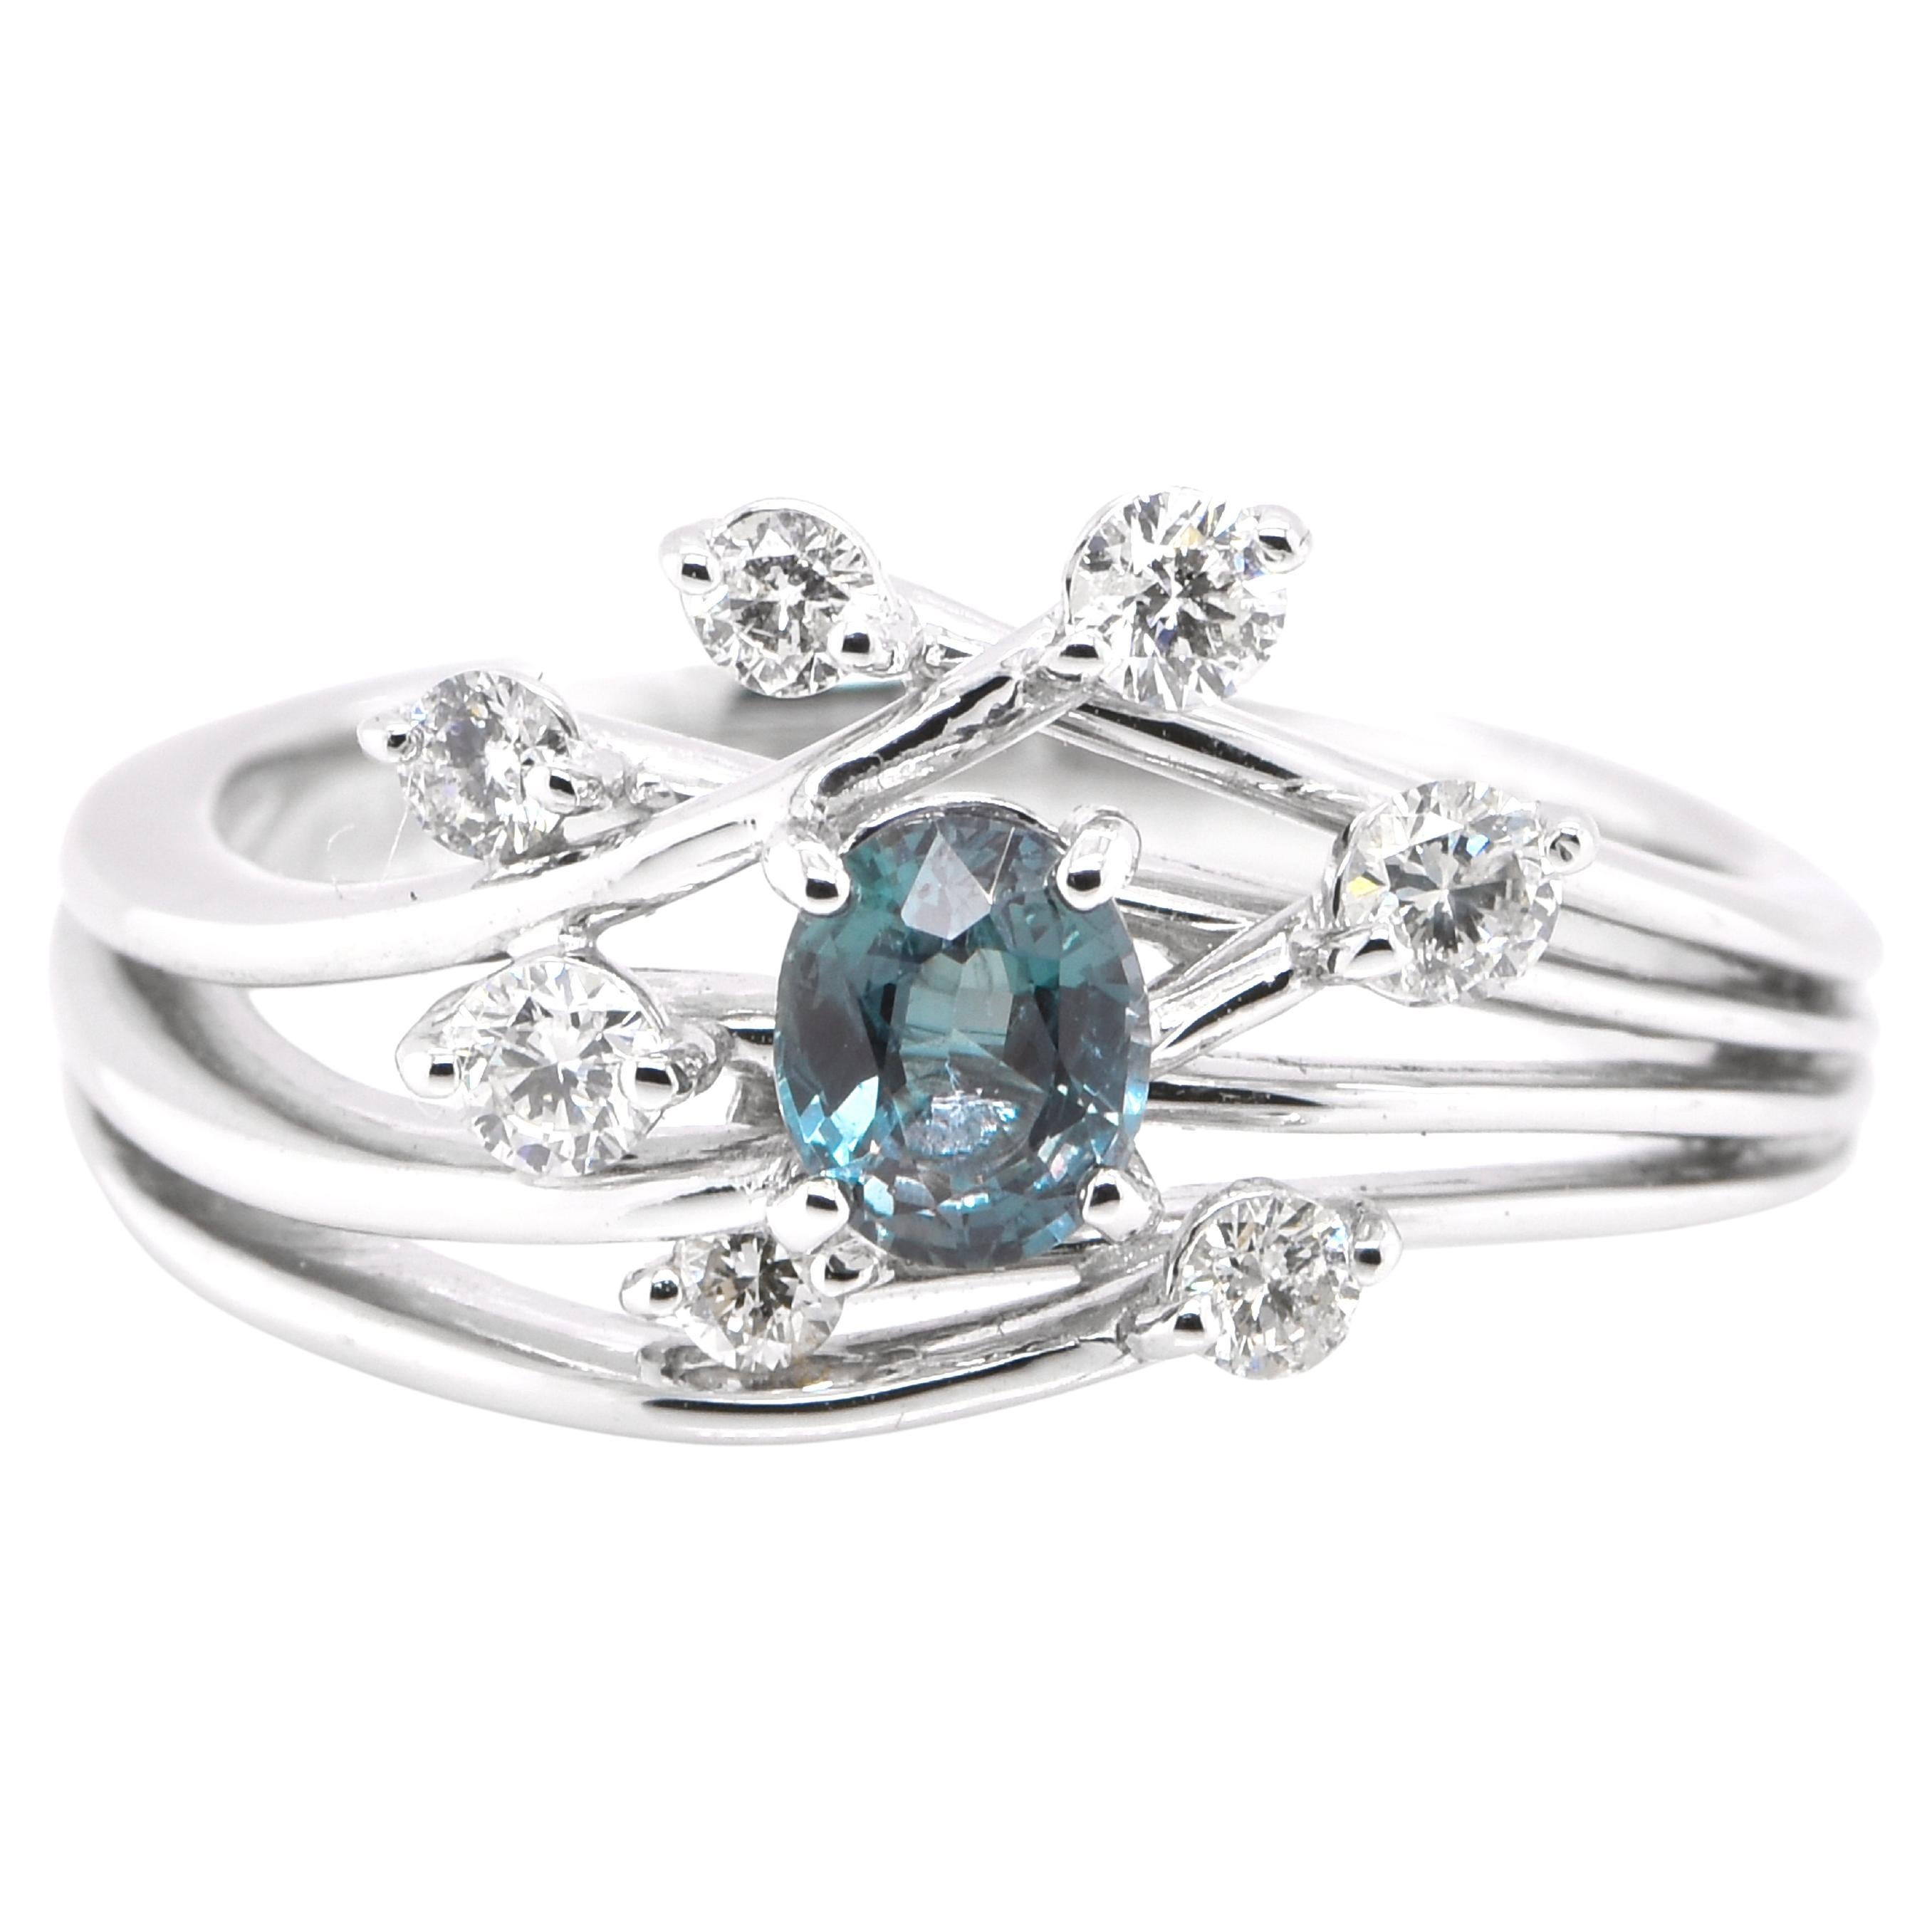 0.45 Carat Natural Color-Changing Alexandrite and Diamond Ring set in Platinum